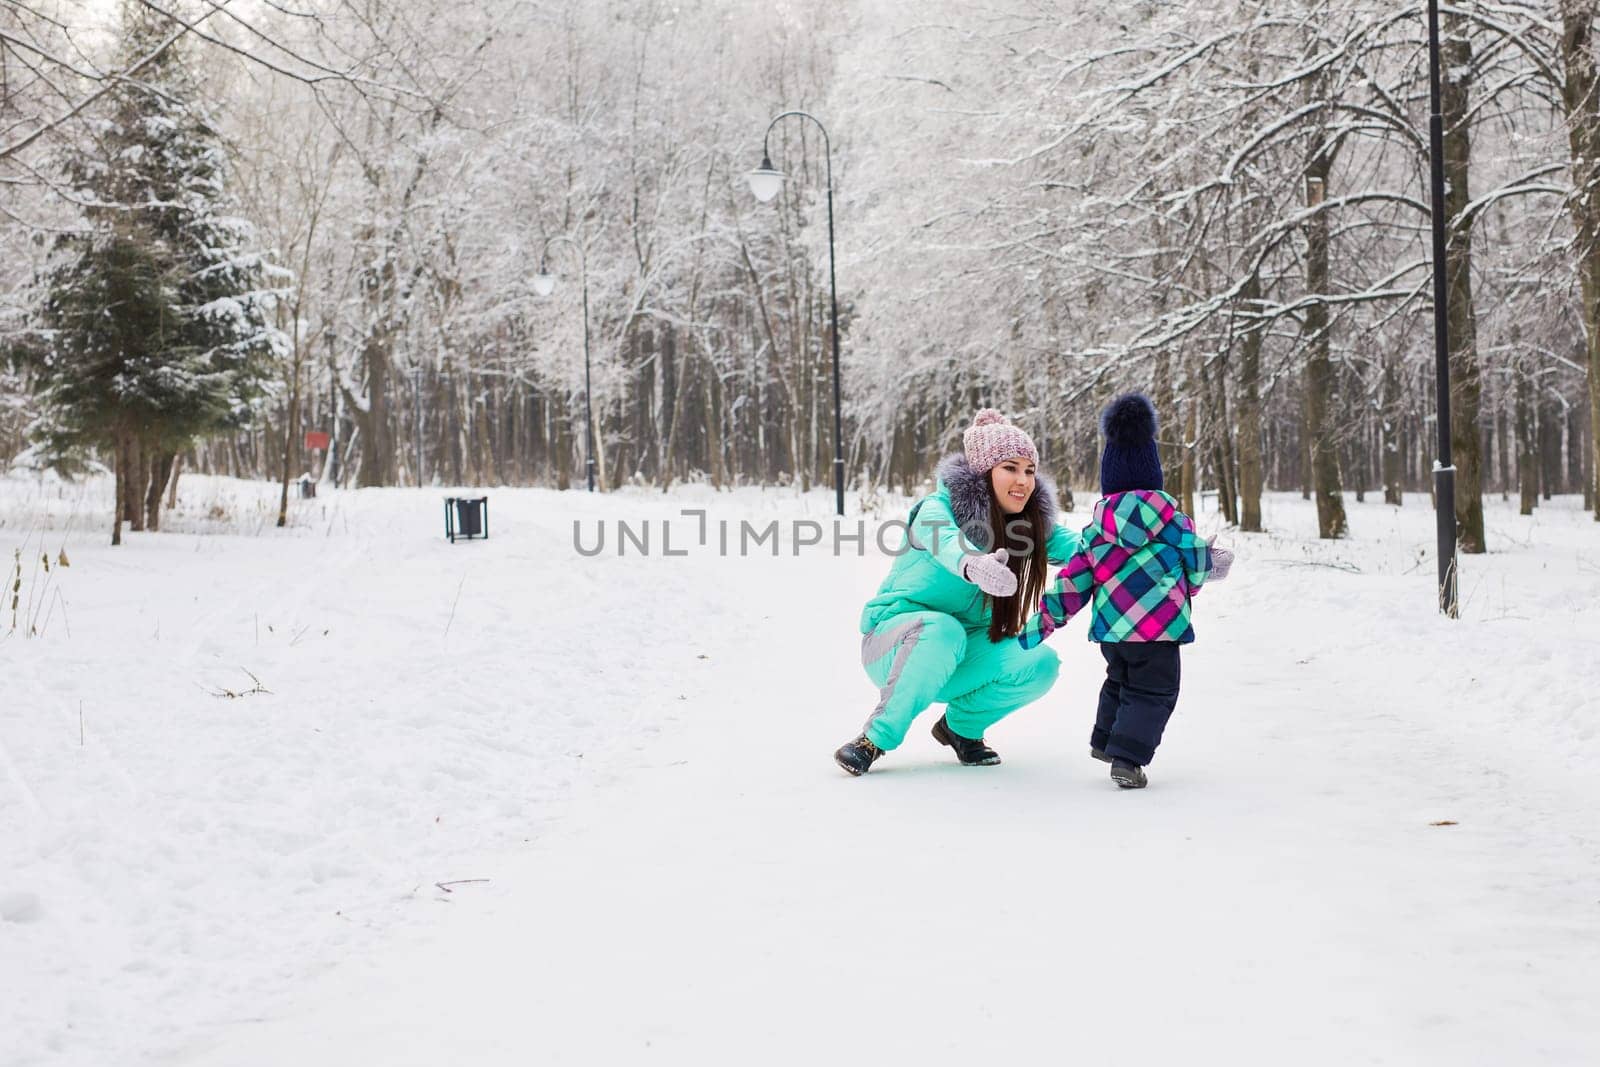 happy family mother and baby girl daughter playing and laughing in winter outdoors in the snow